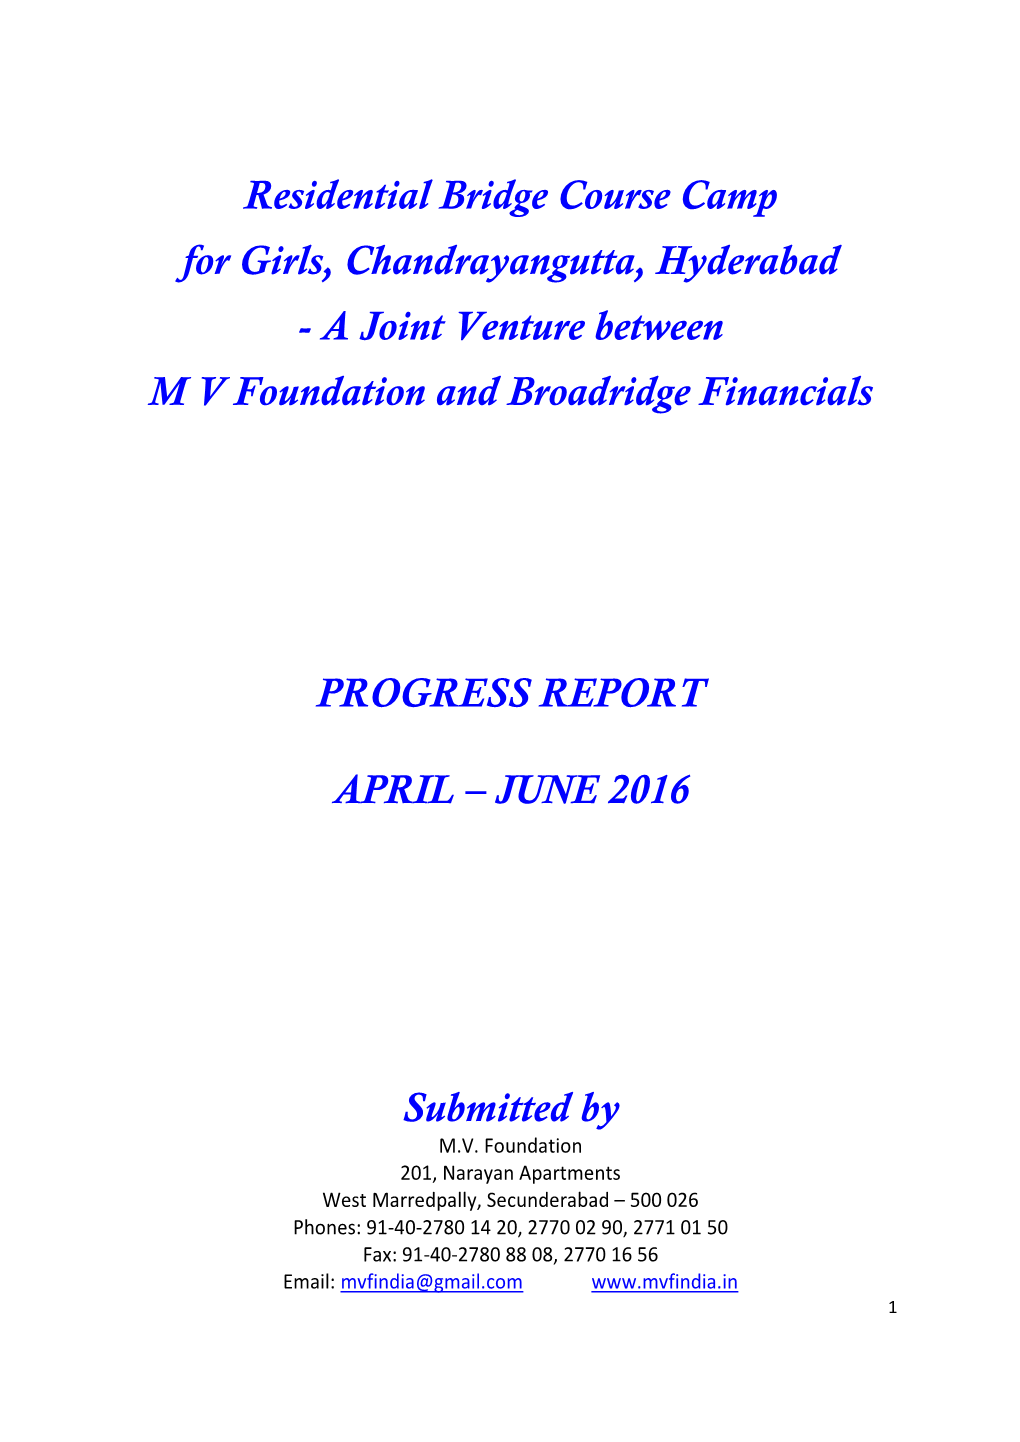 Residential Bridge Course Camp for Girls, Chandrayangutta, Hyderabad - a Joint Venture Between M V Foundation and Broadridge Financials